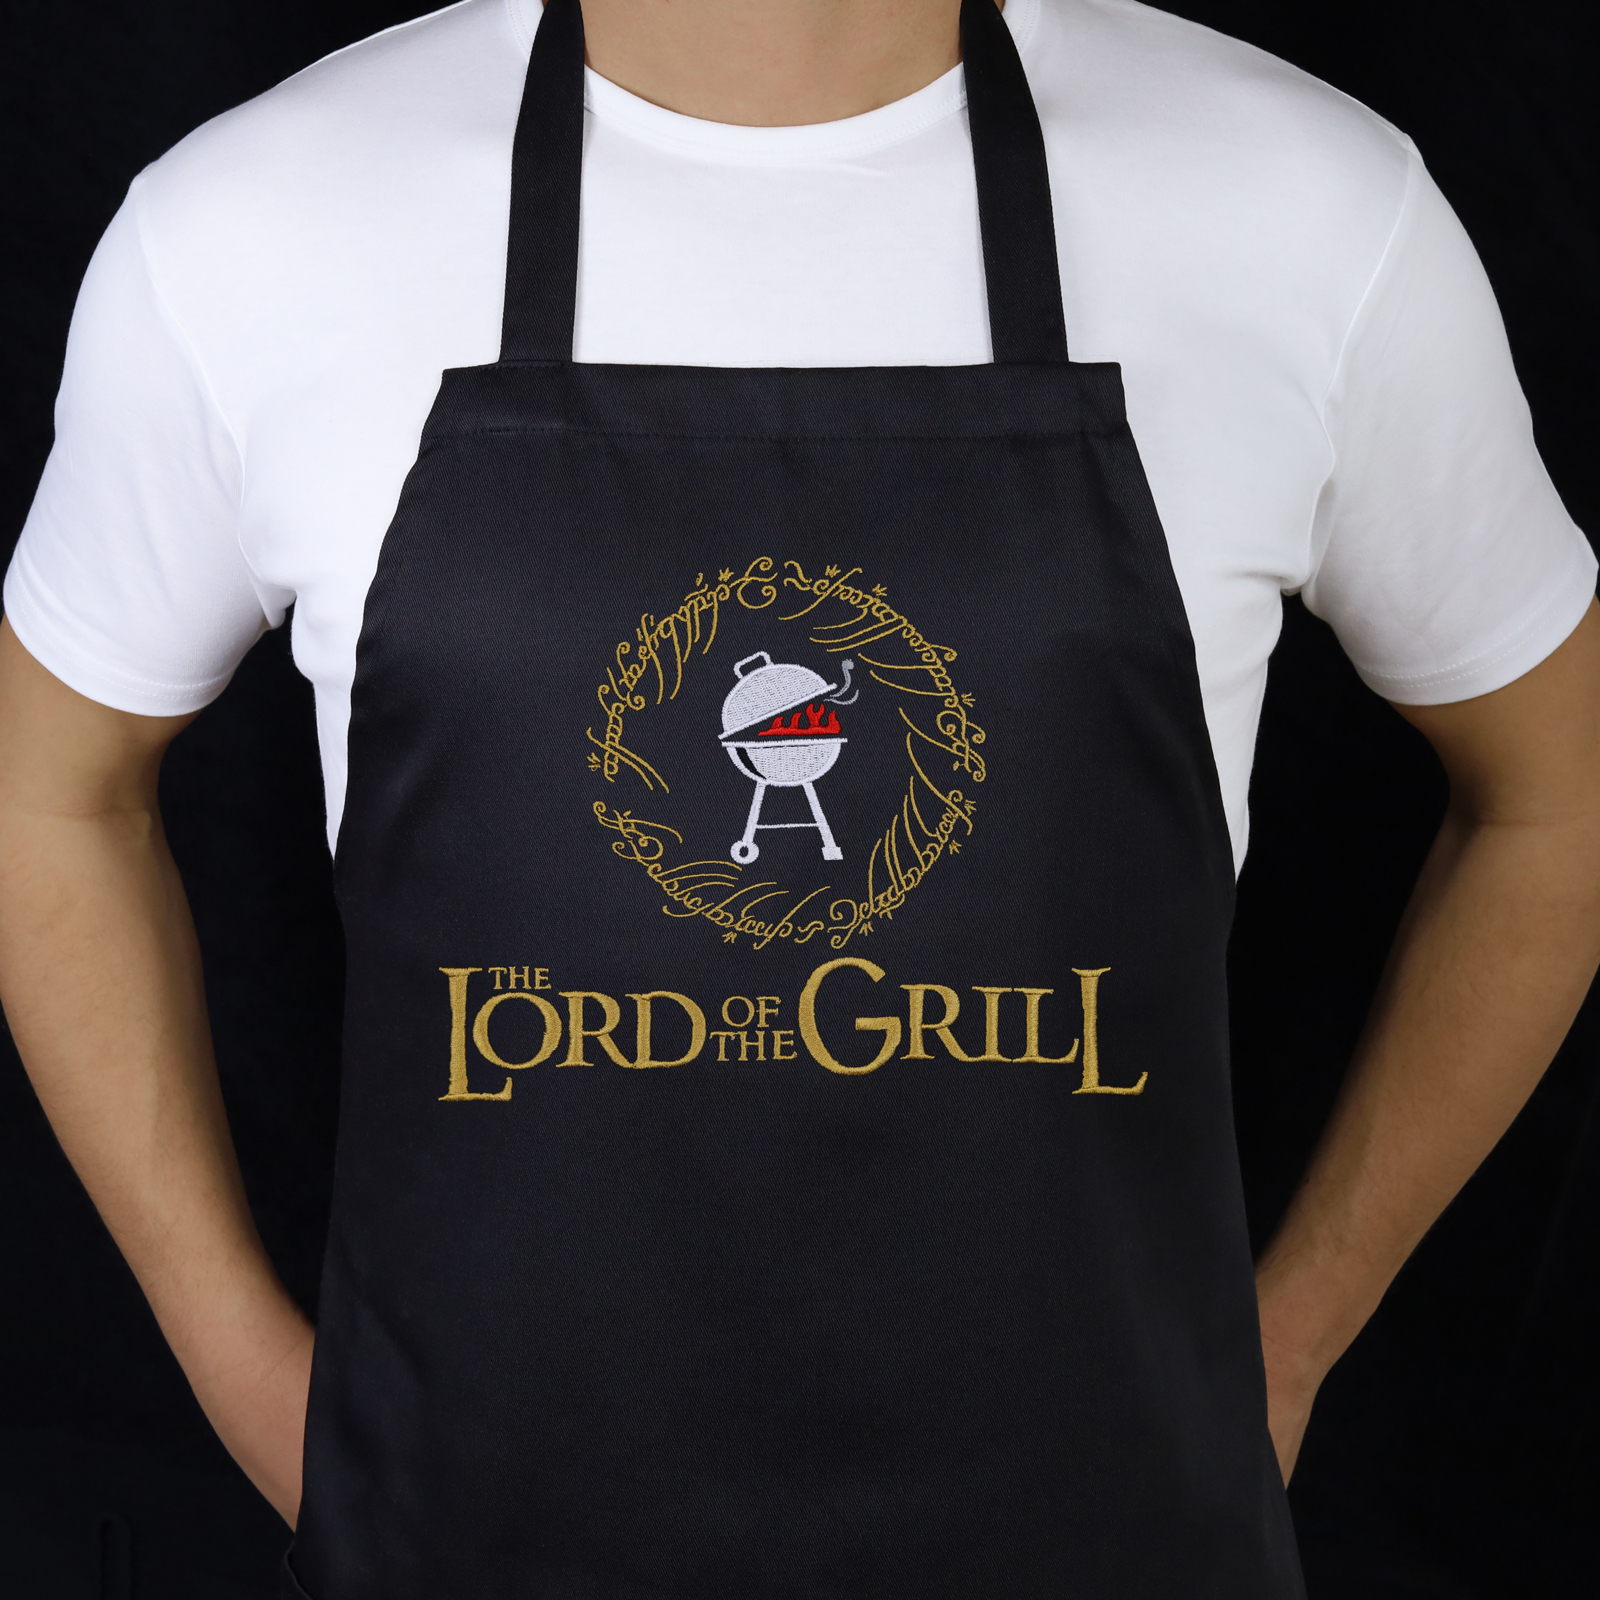 The lord of the grill - Grillschürze